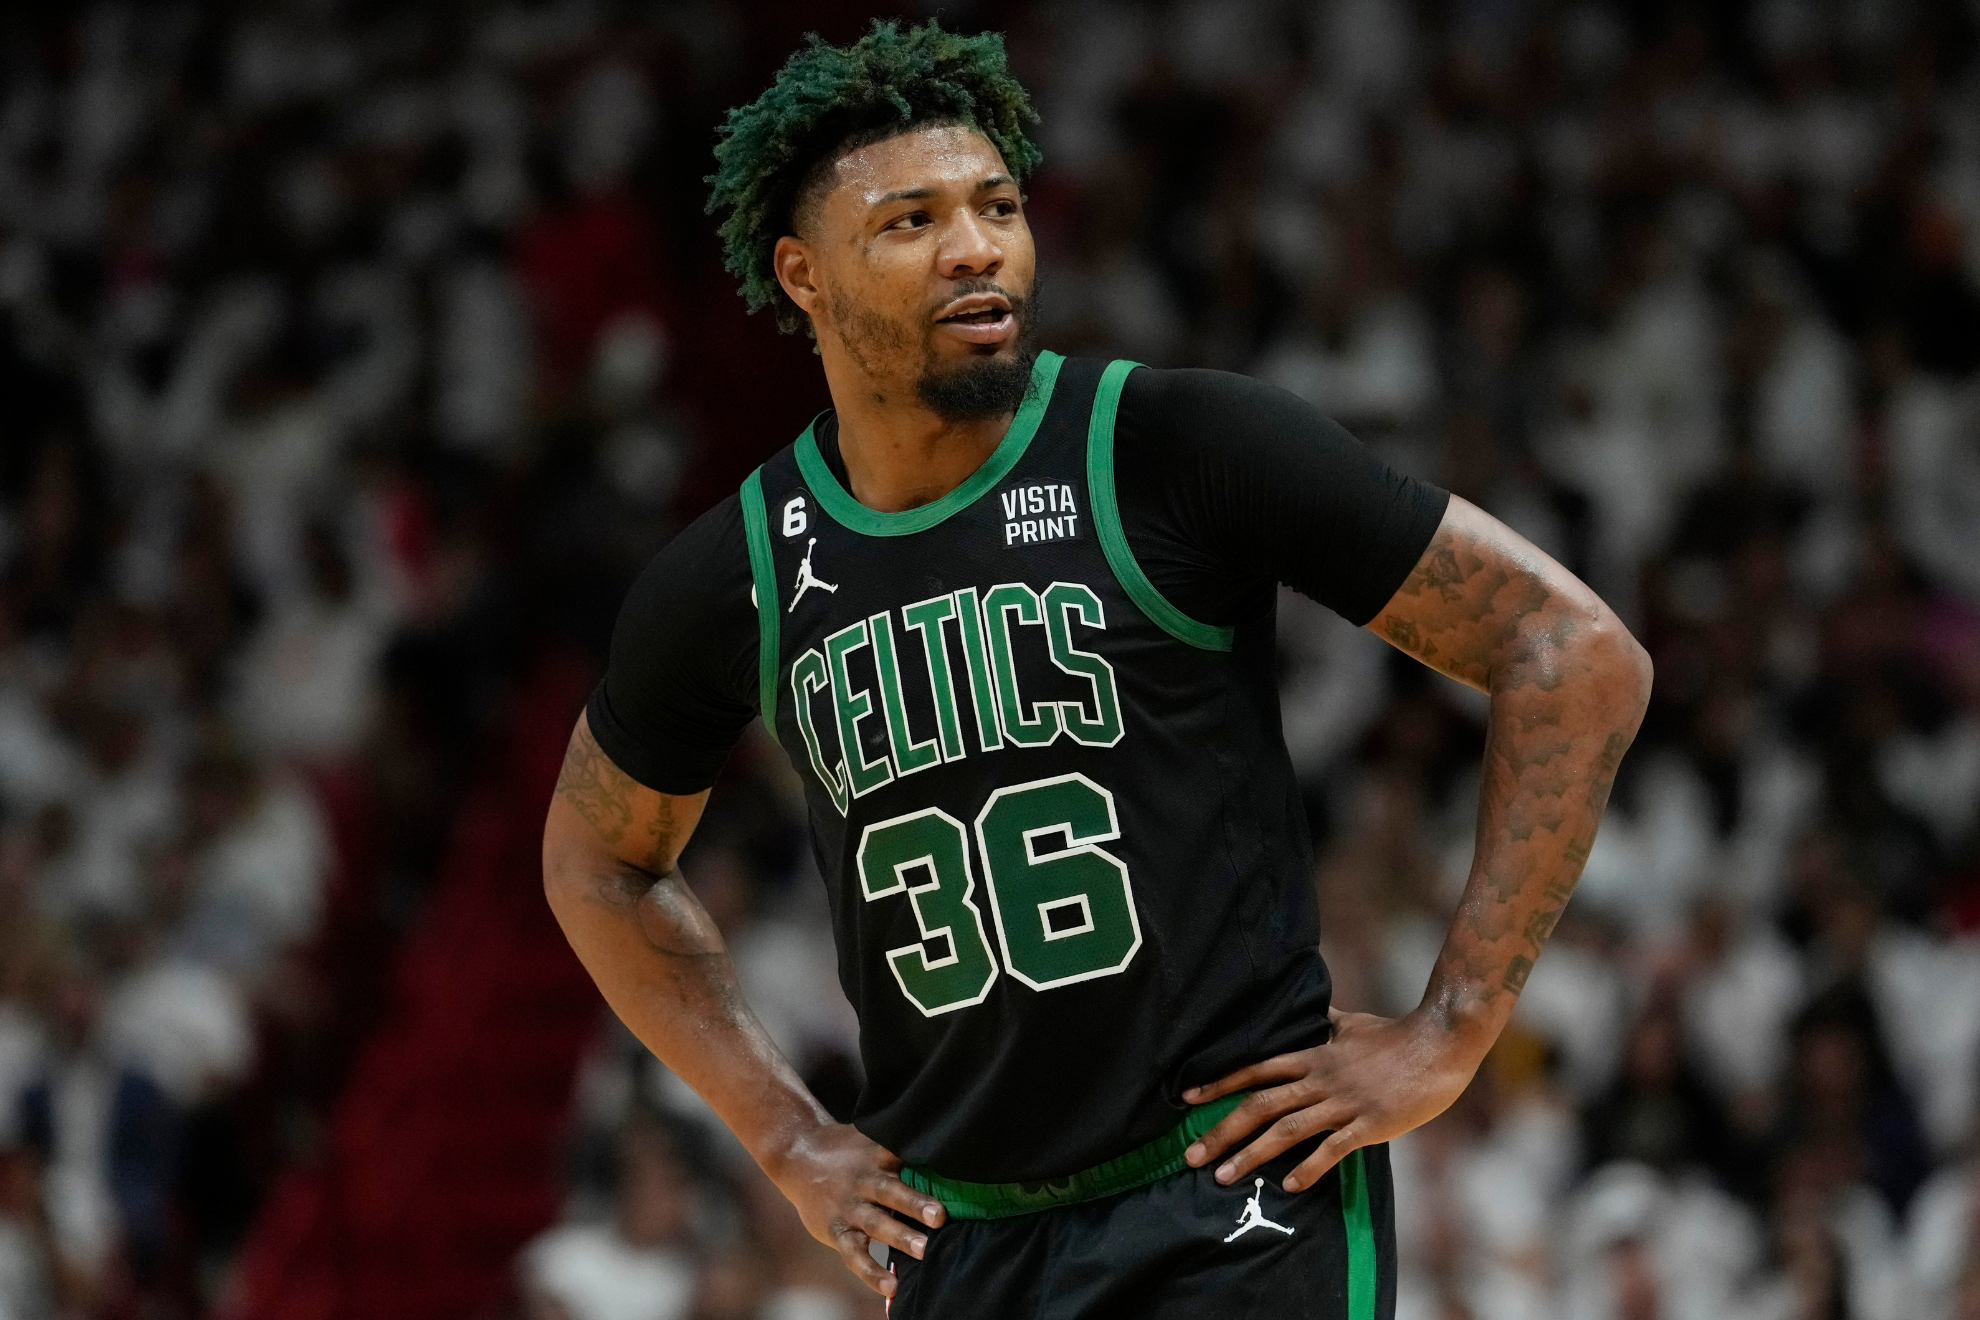 The Celtics drafted Smart sixth overall in 2014, and he played nearly 700 regular season and playoff games for the franchise.